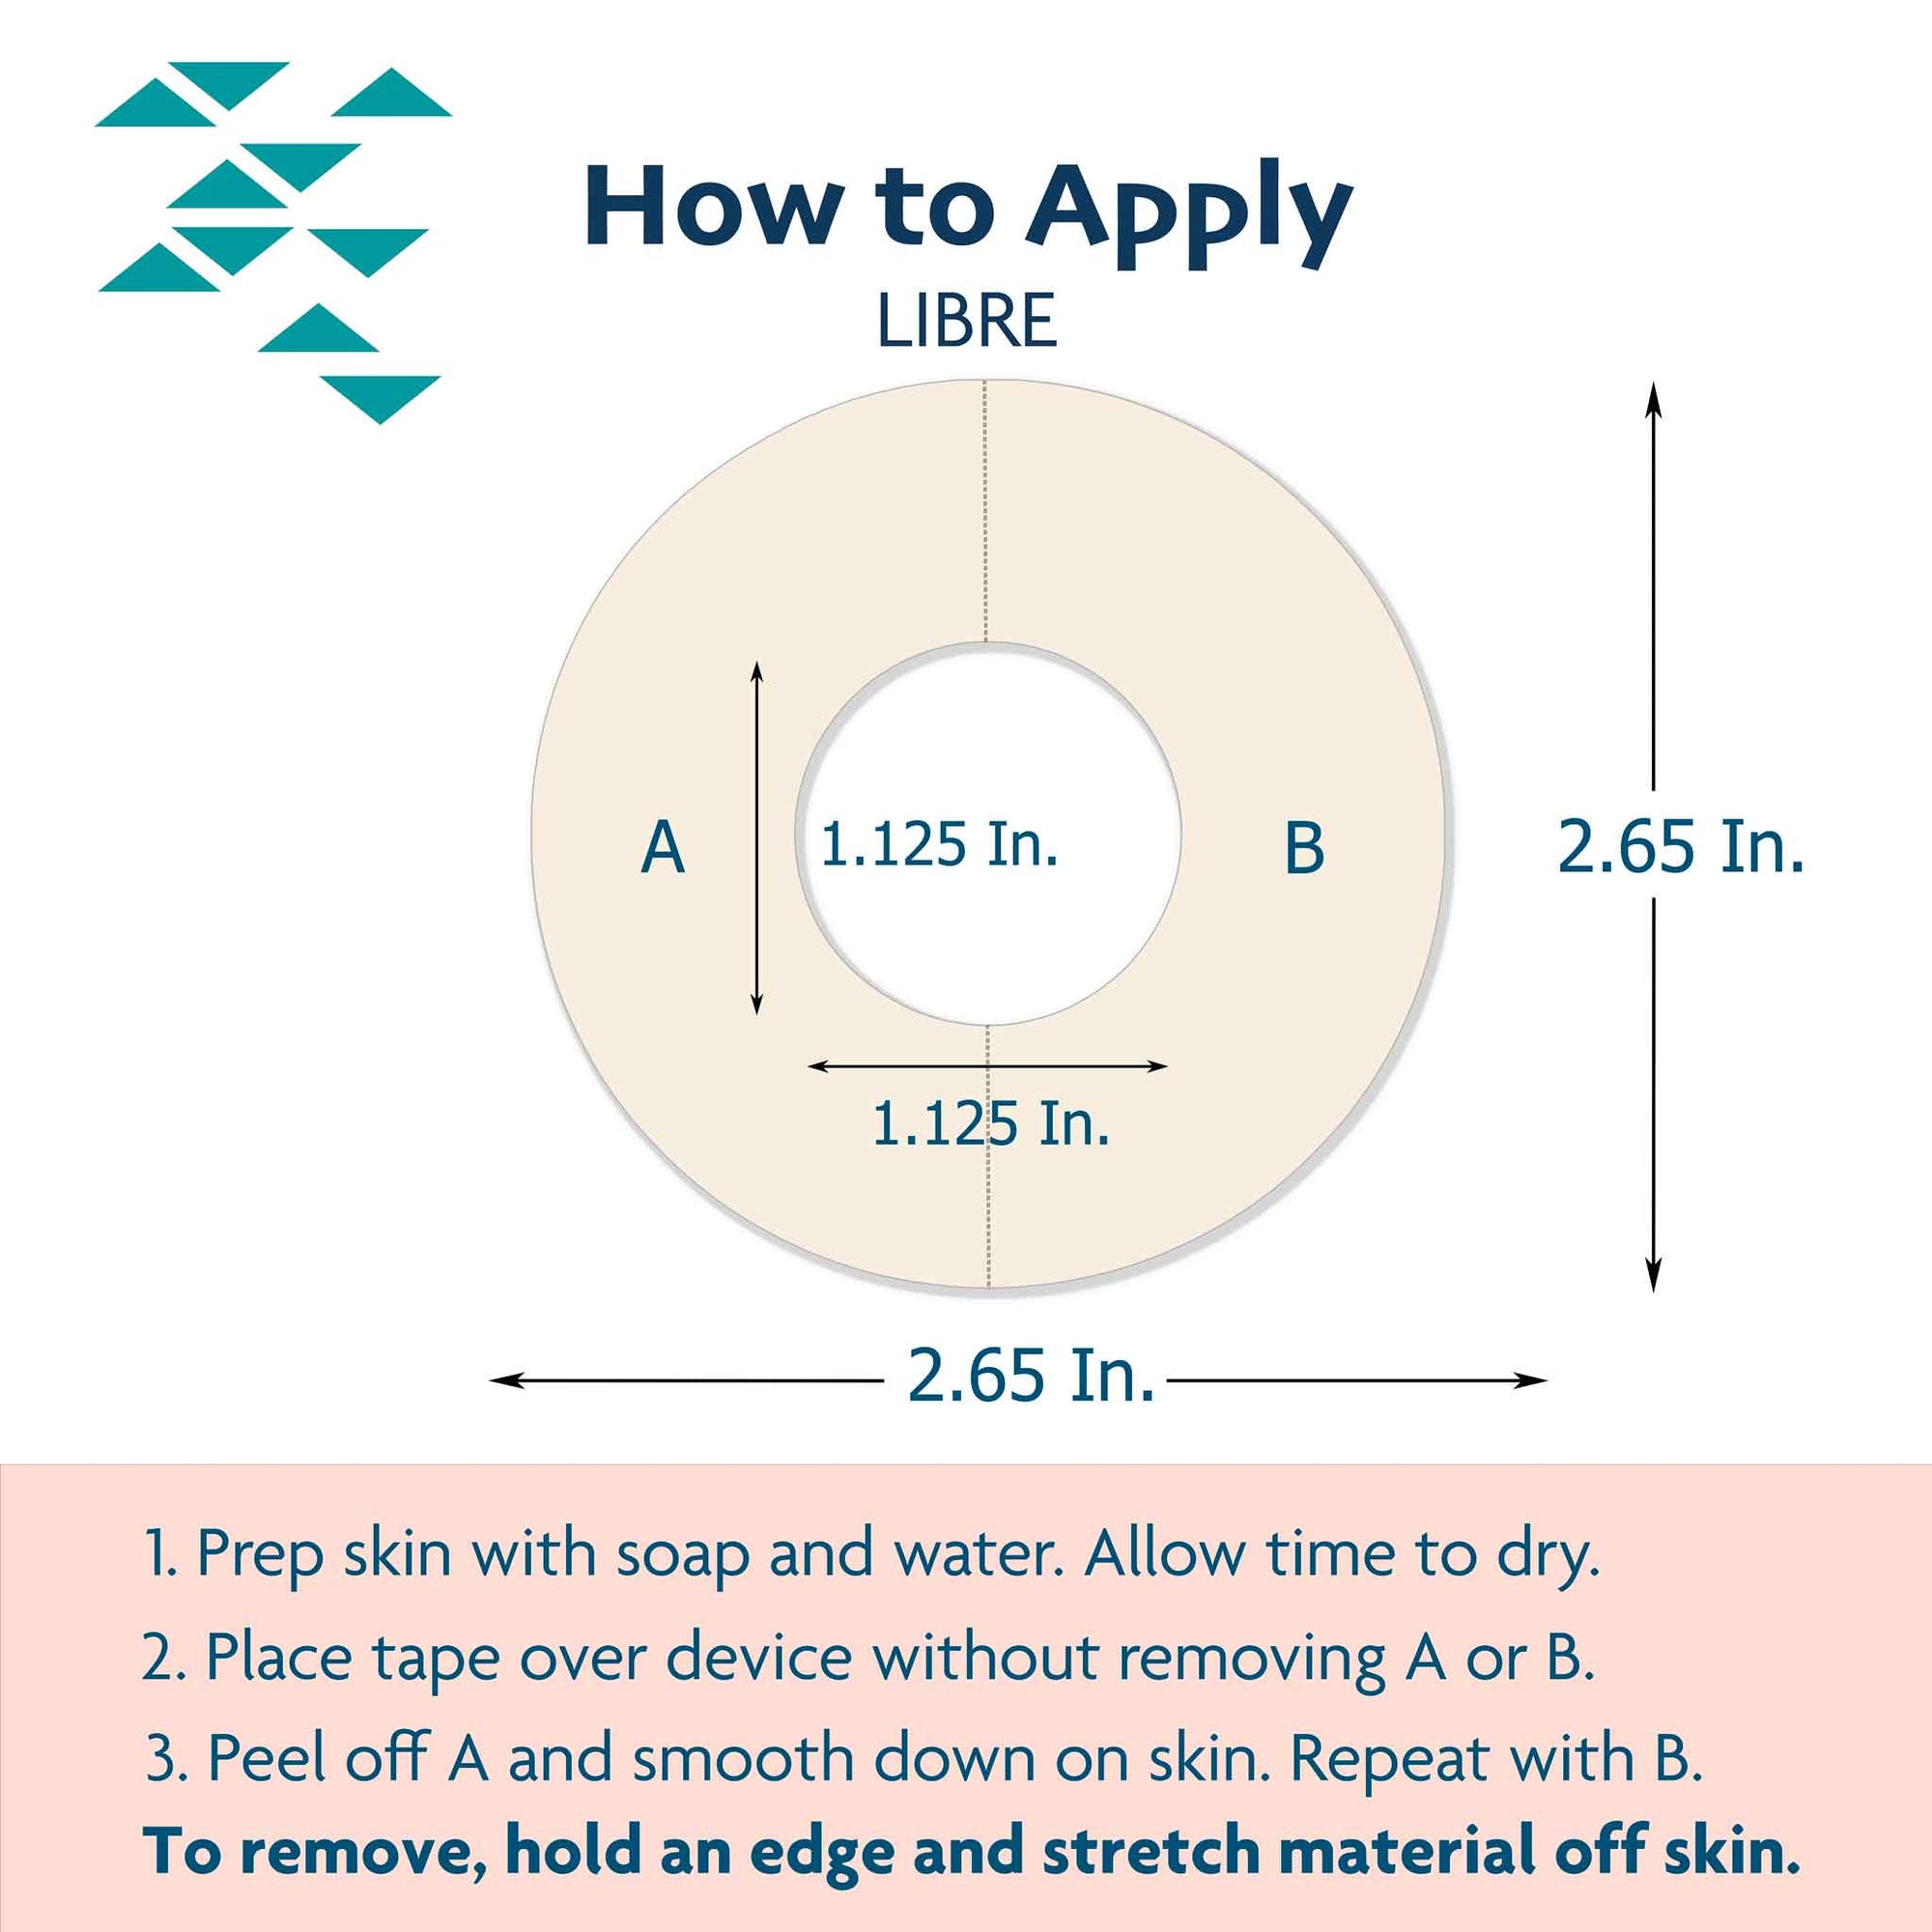 ExpressionMed How to apply freestyle libre adhesives instructions